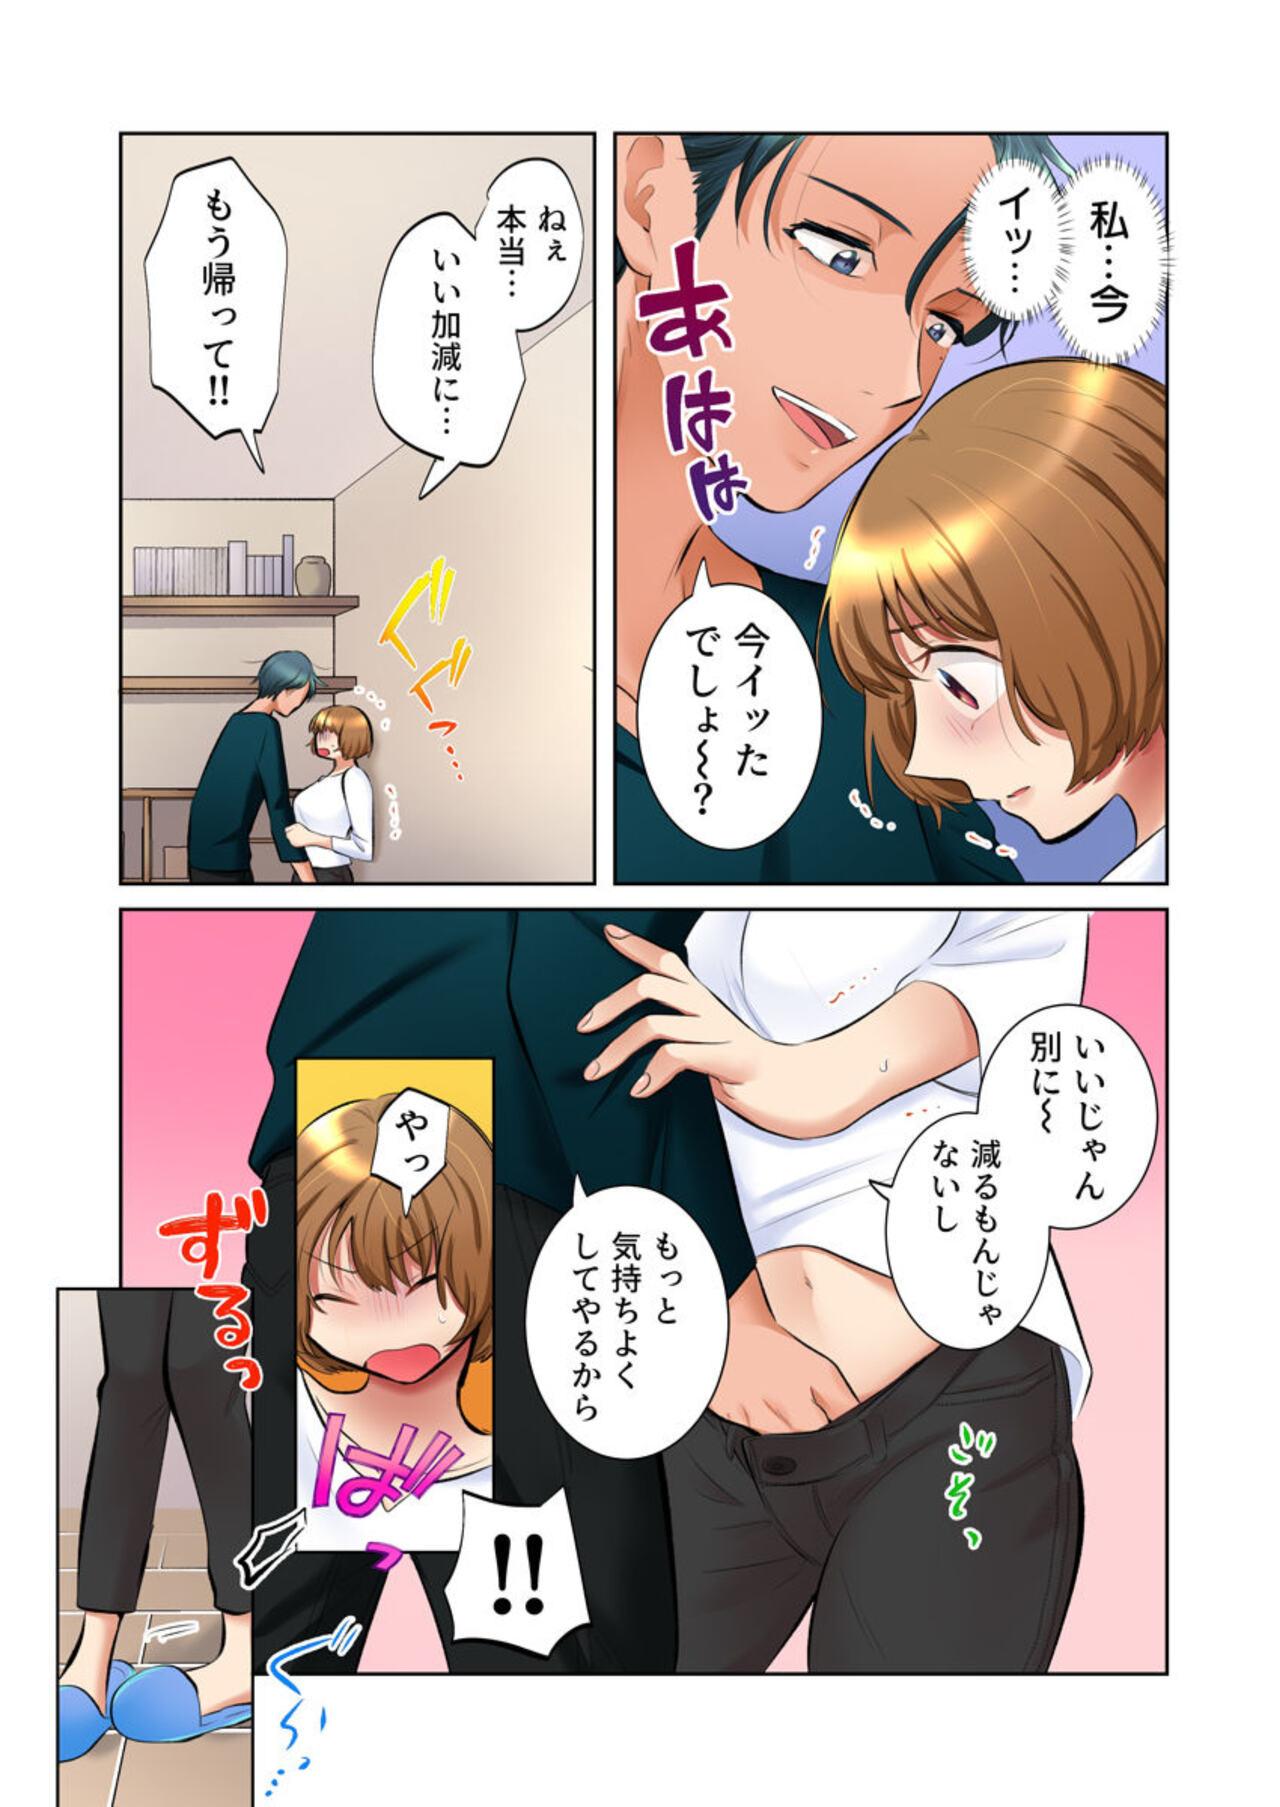 [Ika Hotaru] My Neighbor Is A Sadistic Ex-Boyfriend ~I Love My Husband, But My Aching Body Has Been Redeveloped~ (Full Color) 2 22